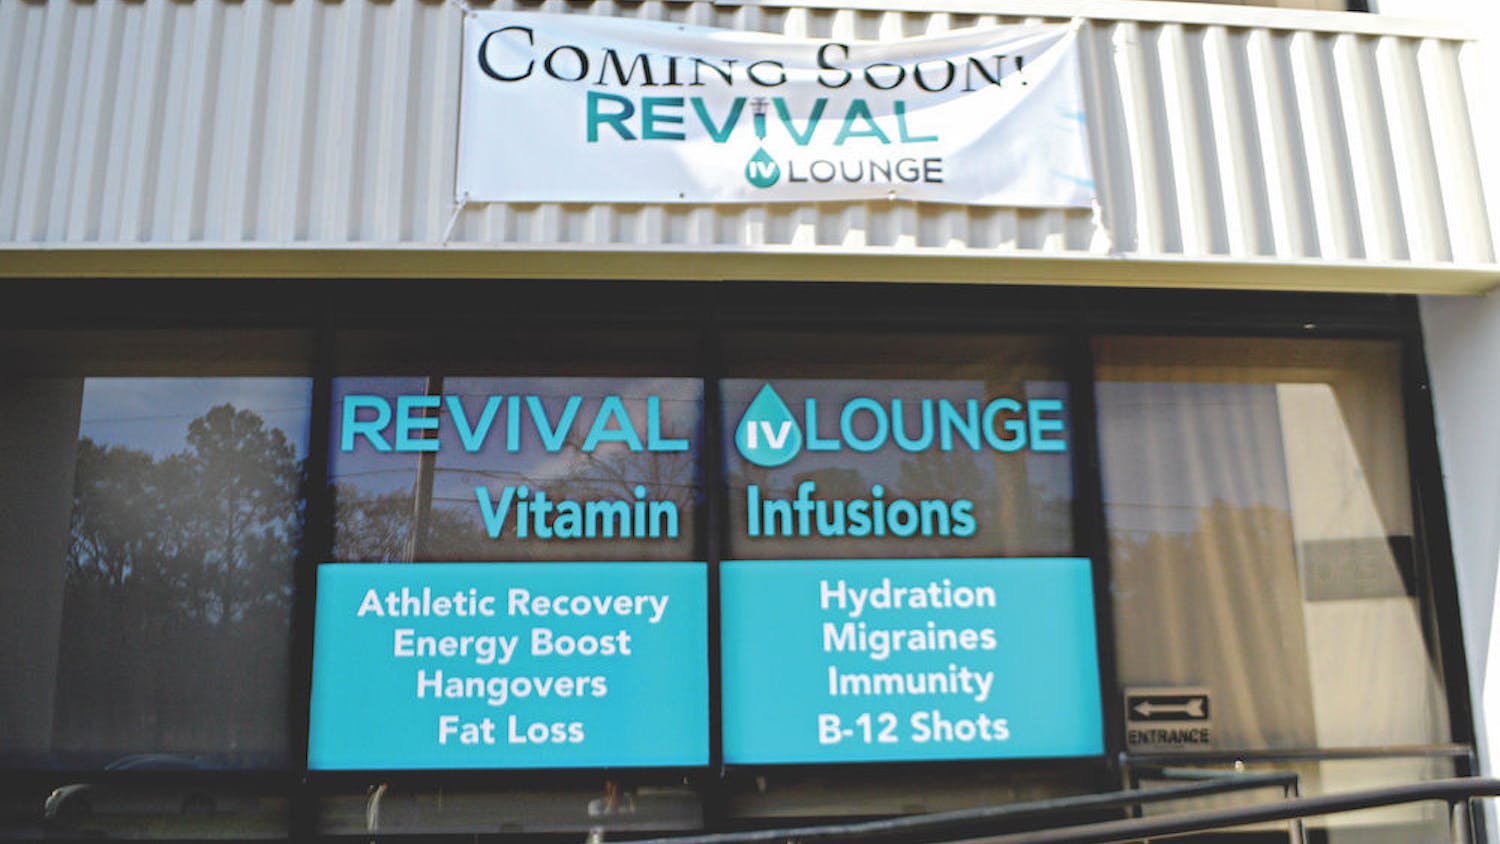 Revival IV Lounge is Gainesville's newest health spa that focuses on rejuvenating customers through vitamin-infused IV drips. In addition to these treatments, the lounge also offers a variety of intramuscular shots that aid in boosting energy and promoting weight loss.
&nbsp;